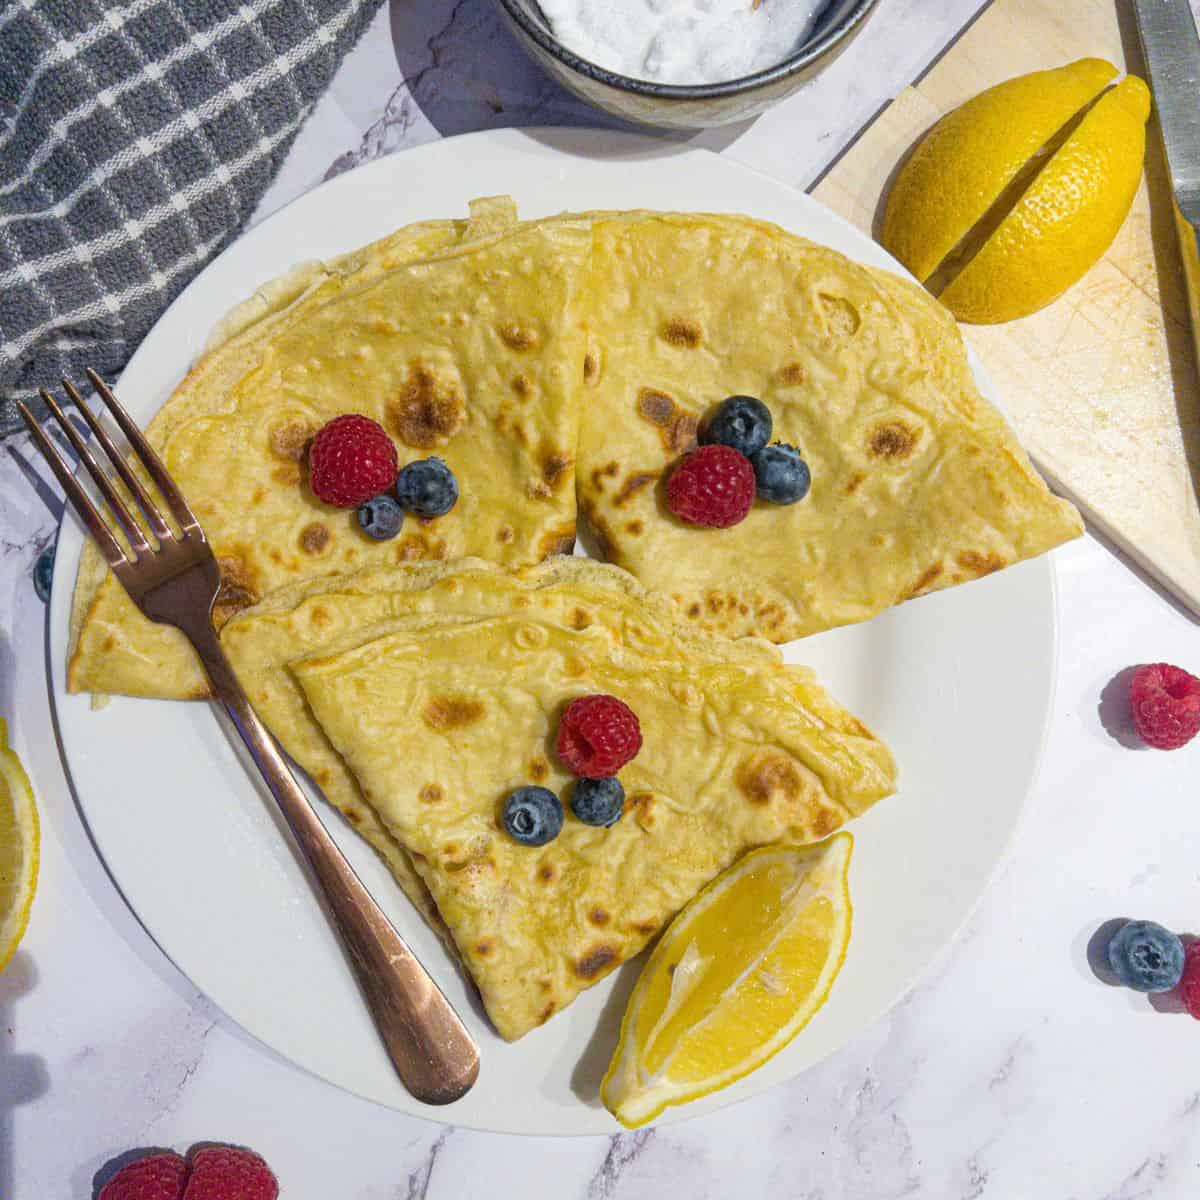 https://thescattymum.com/wp-content/uploads/2023/02/dairy-free-crepes-1200x1200-1.jpg